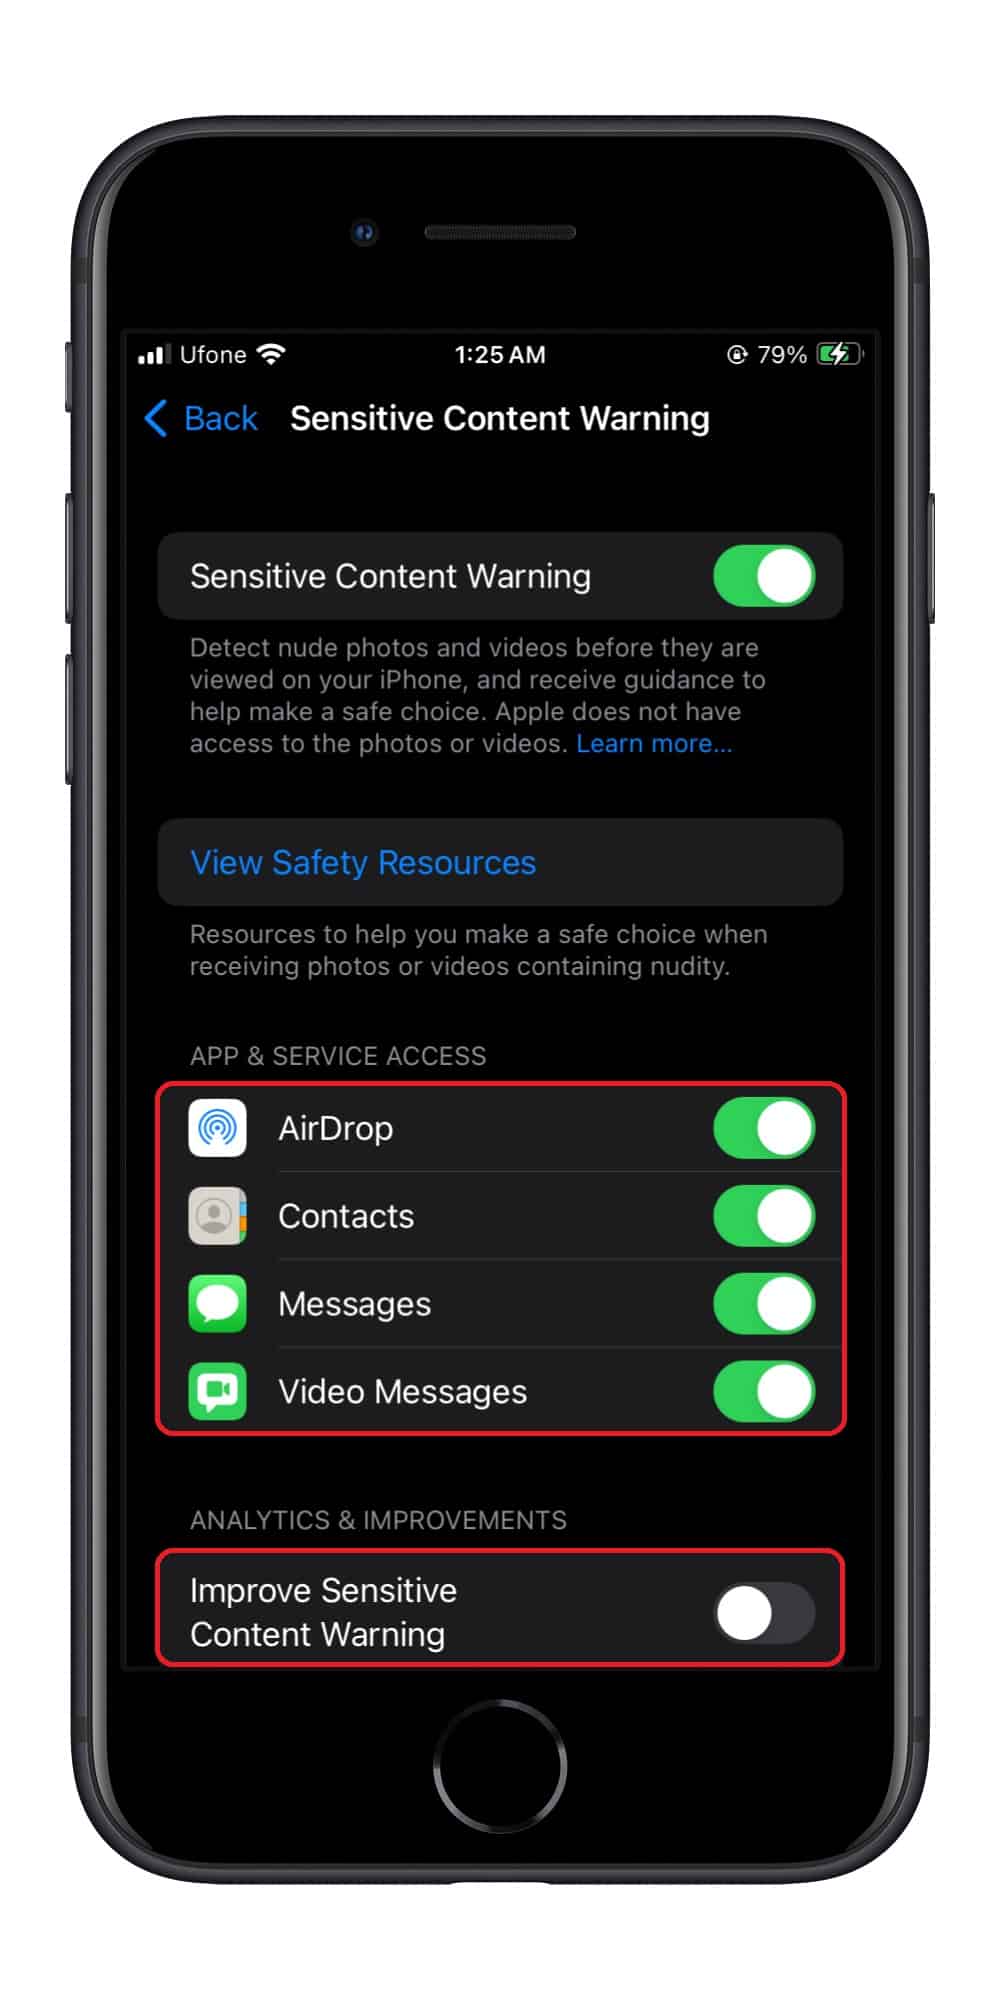 How to enable Sensitive Content Warnings in iOS 17